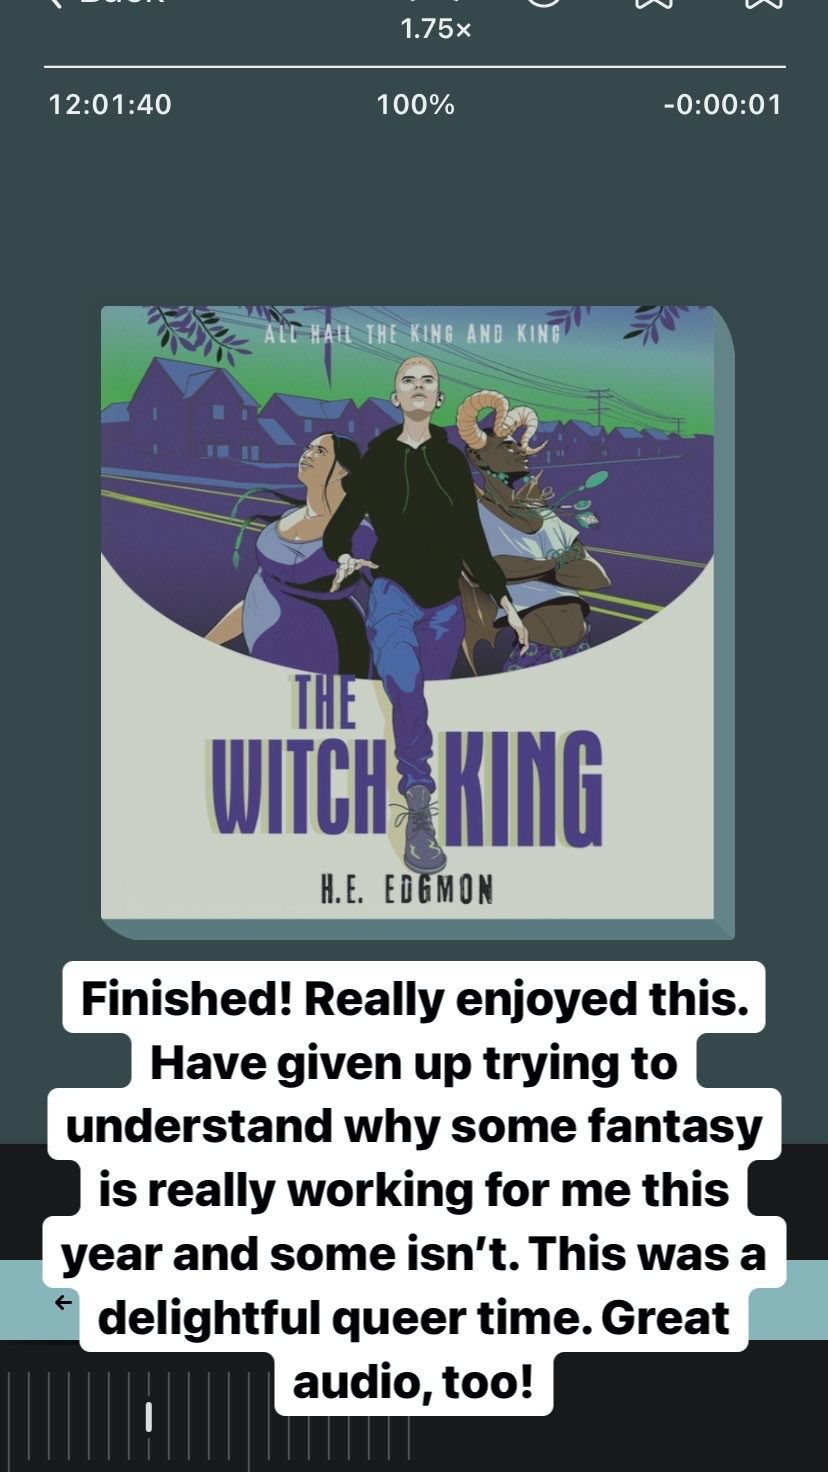 Screenshot of an Instagram story showing The Witch King by H.E. Edgmon playing in the Libby app. Text reads: Finished! Really enjoyed this. Have given up trying to understand why some fantasy is really working for me this year and some isn't. This was a delightful queer time. Great audio, too! Photo by me.